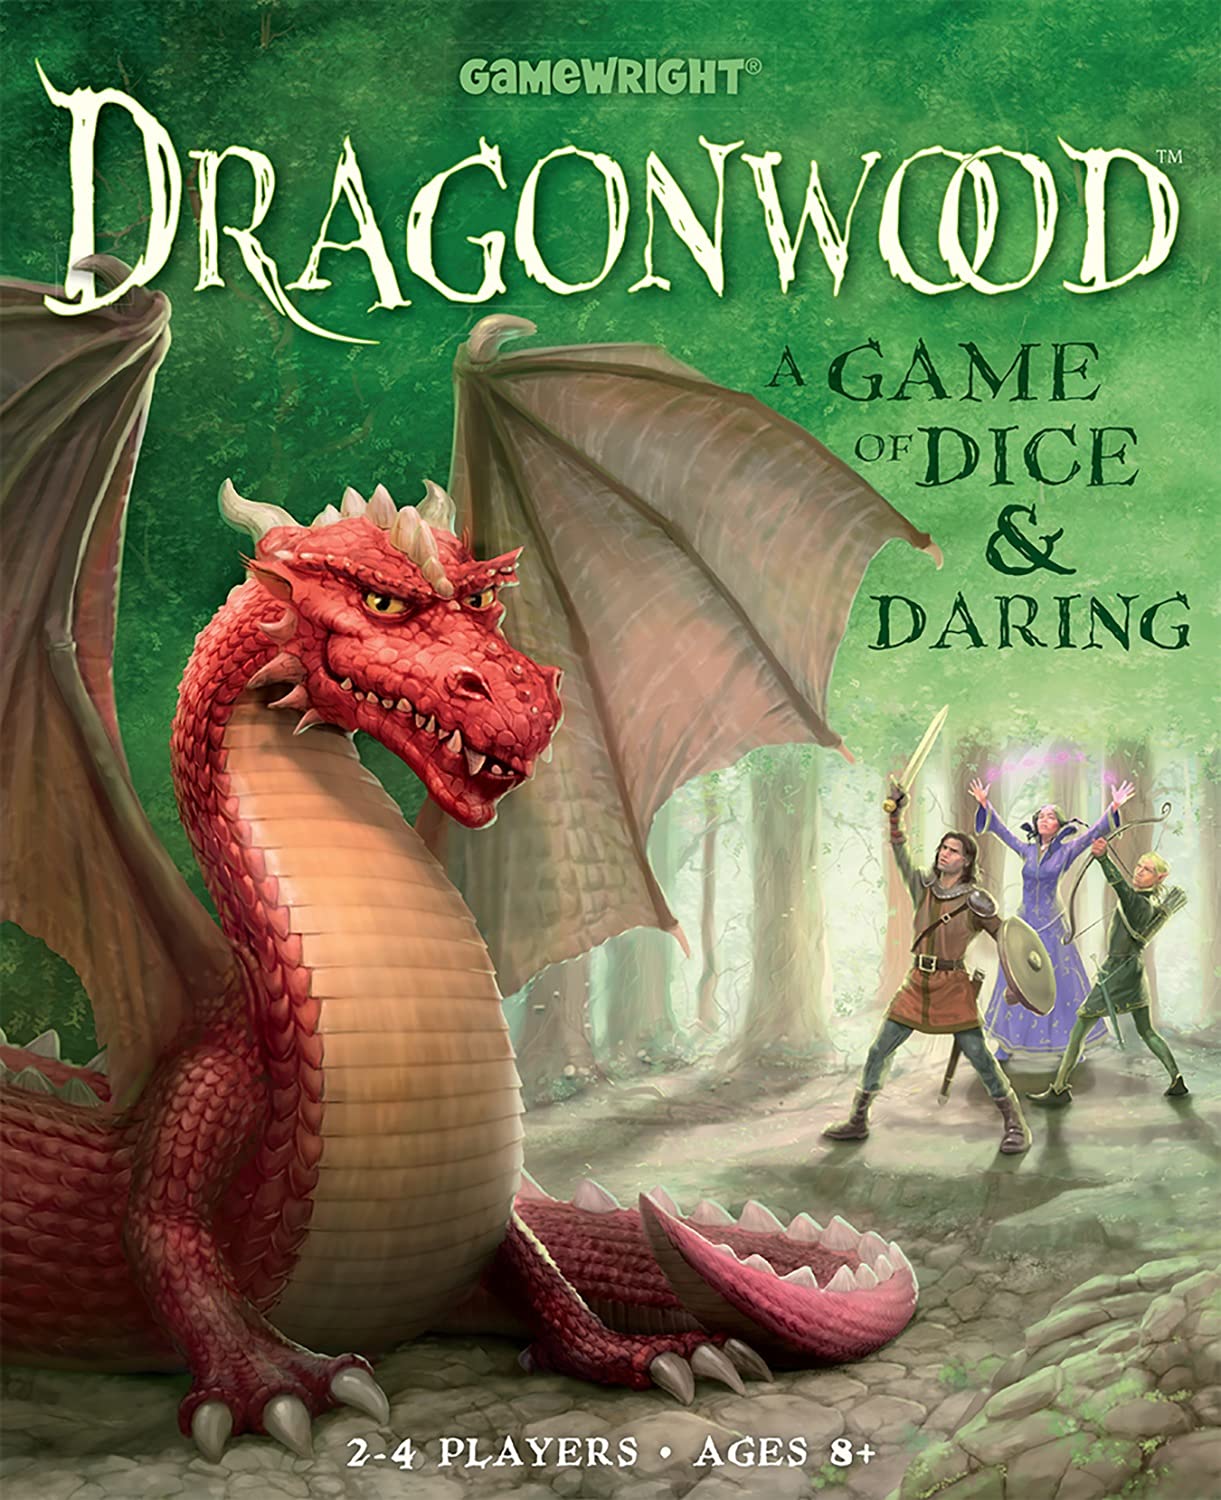 Gamewright Dragonwood A Game of Dice & Daring Board Game Multi-colored, 5